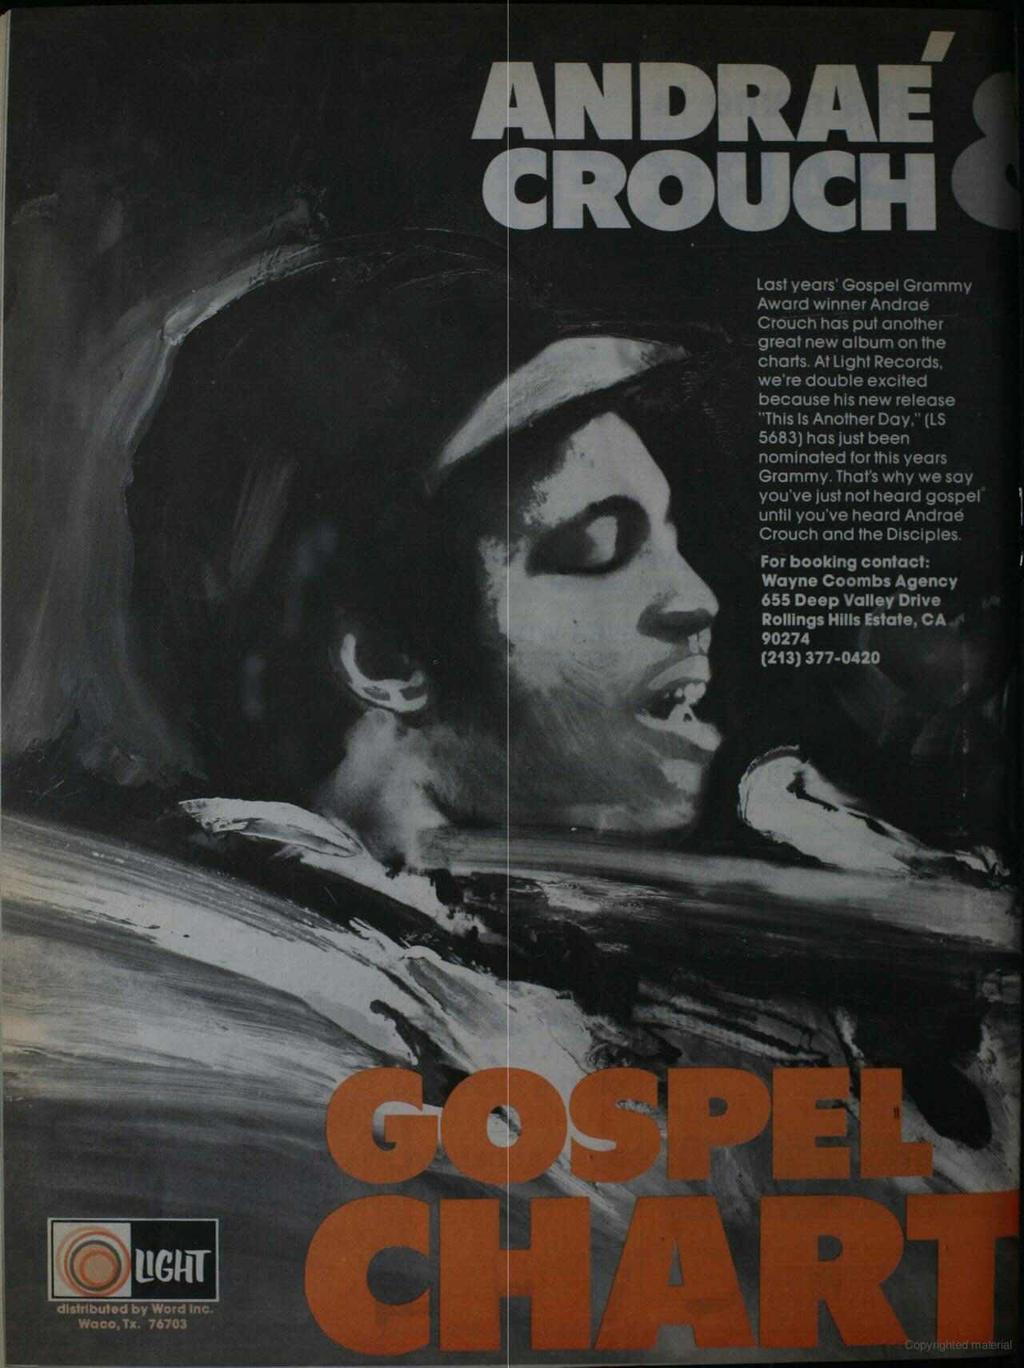 ANDRA! ROUCH i.. Last years' Gospel Grammy Award winner Andrae Crouch has put another great new album on the charts. At Light Records.